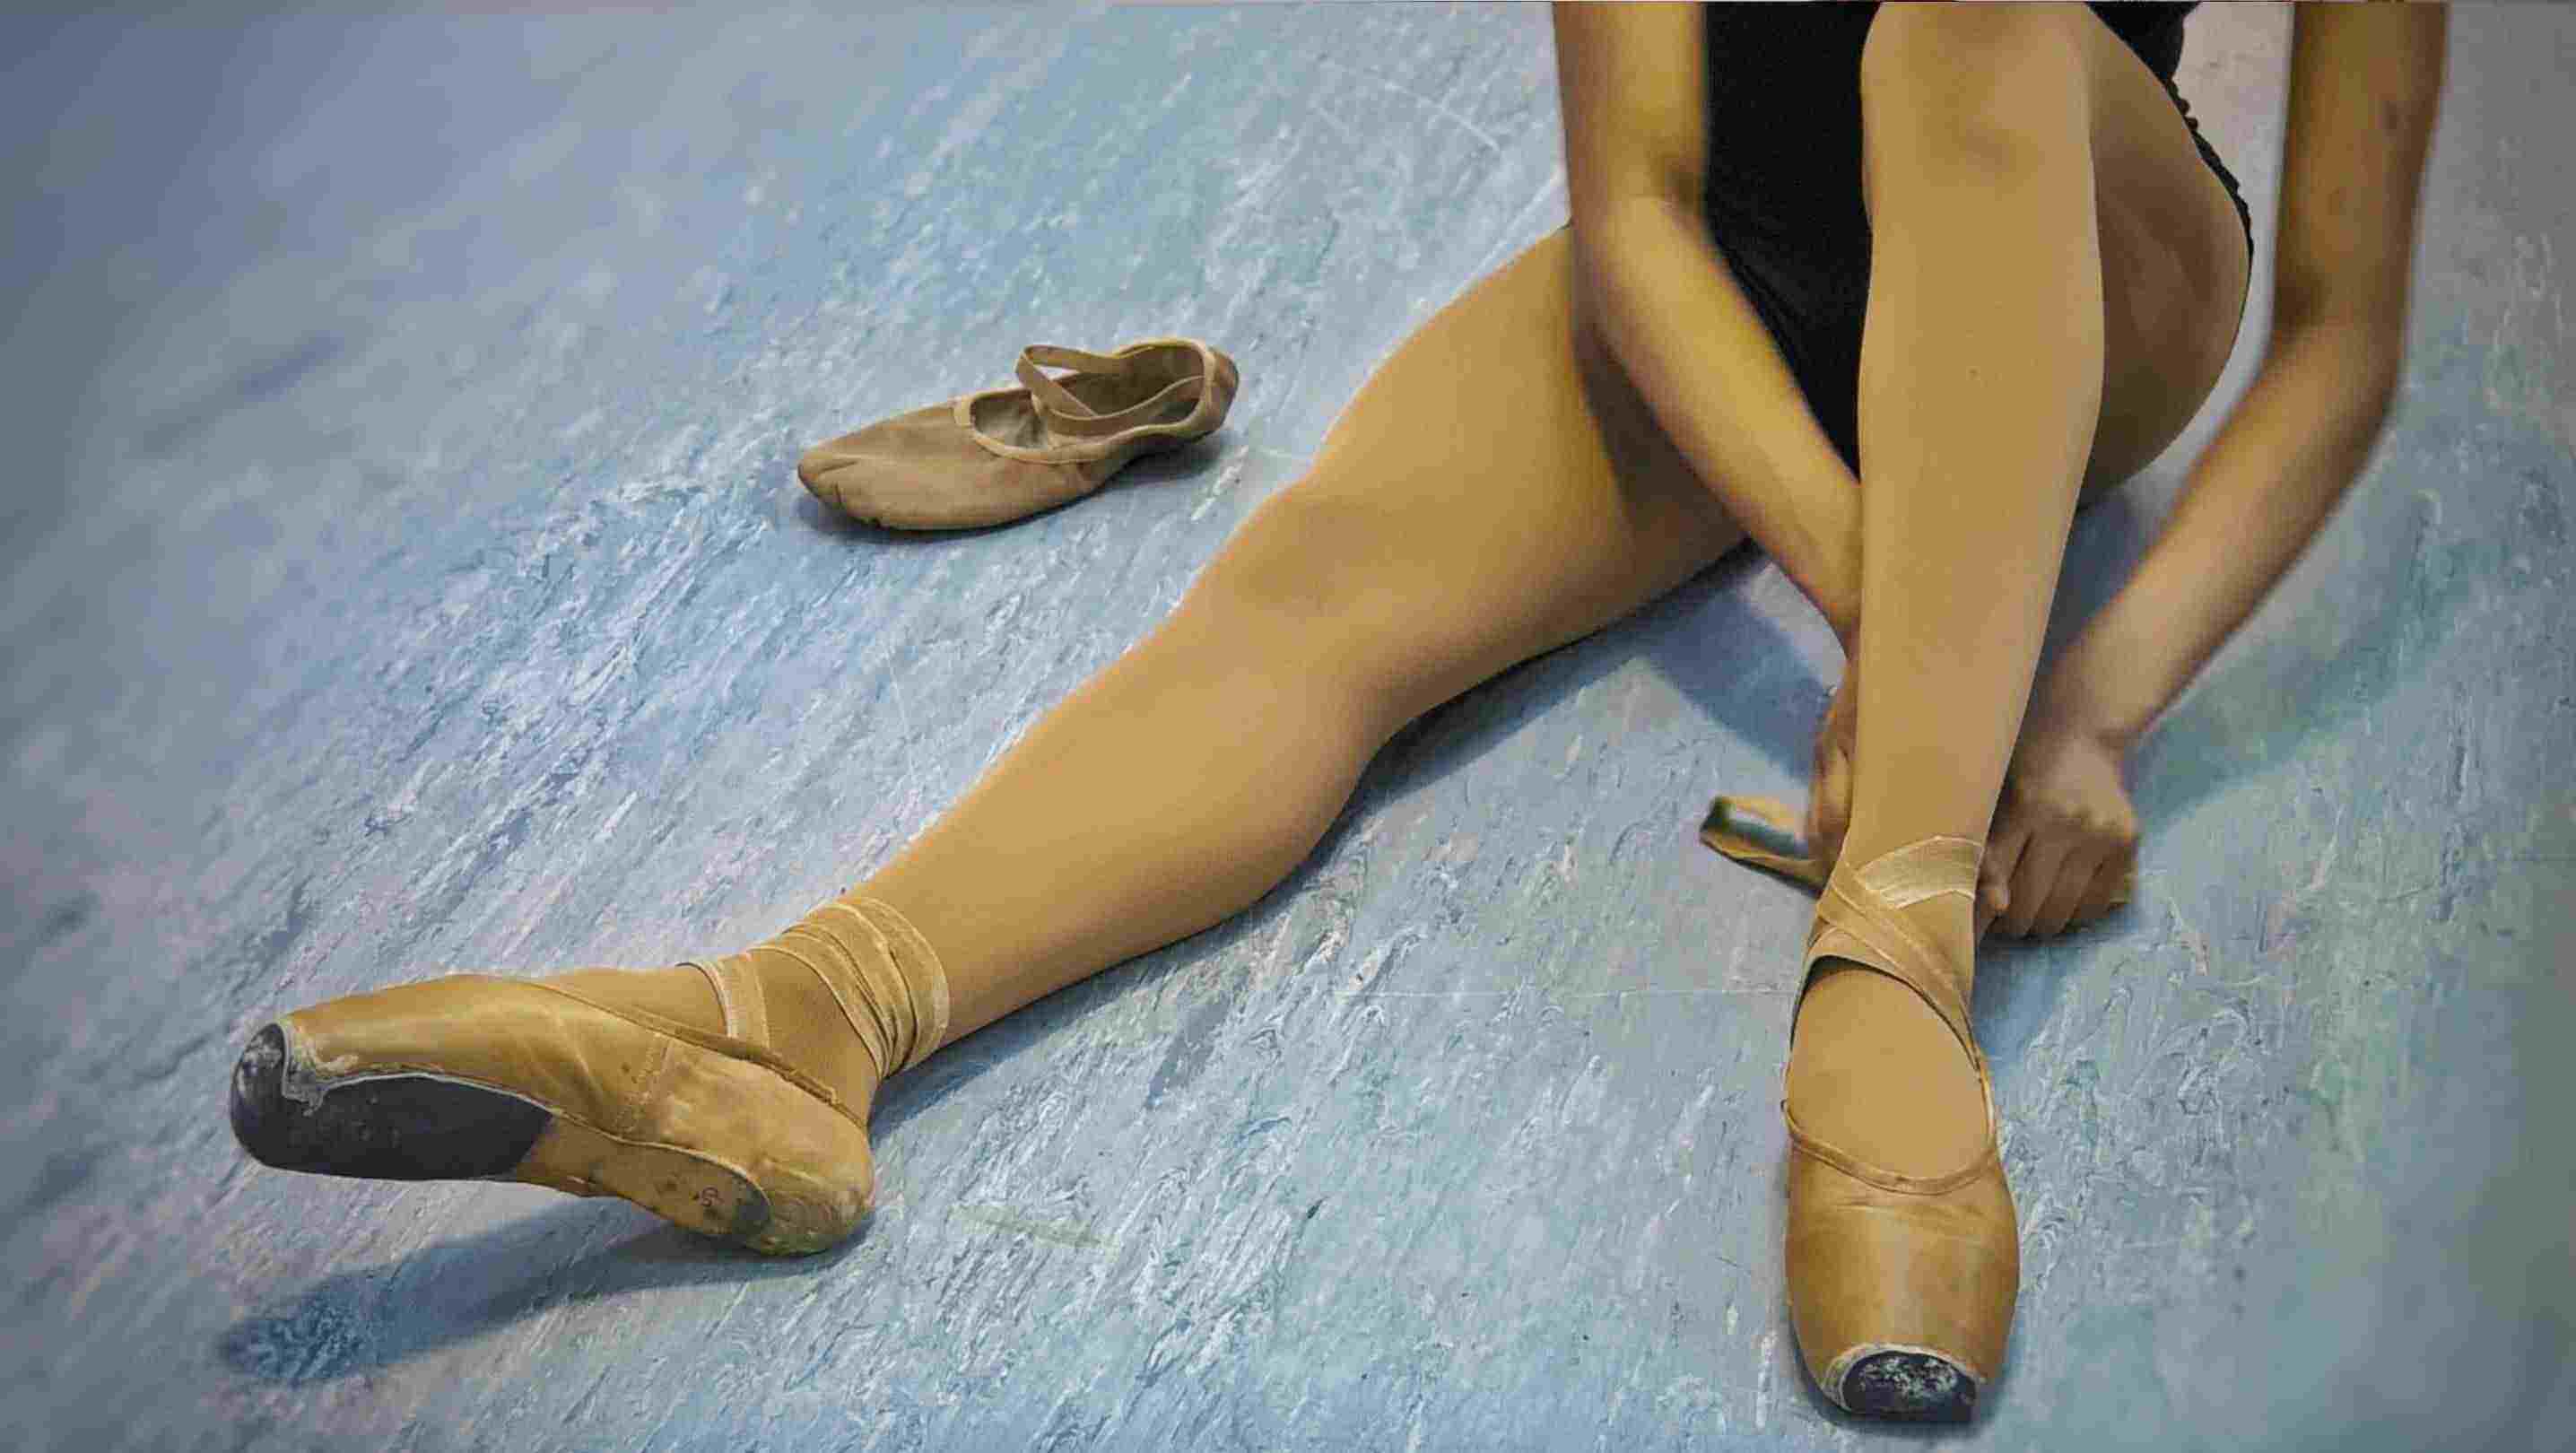 Flesh-tone tights empower ballet dancers of color - Medill Reports